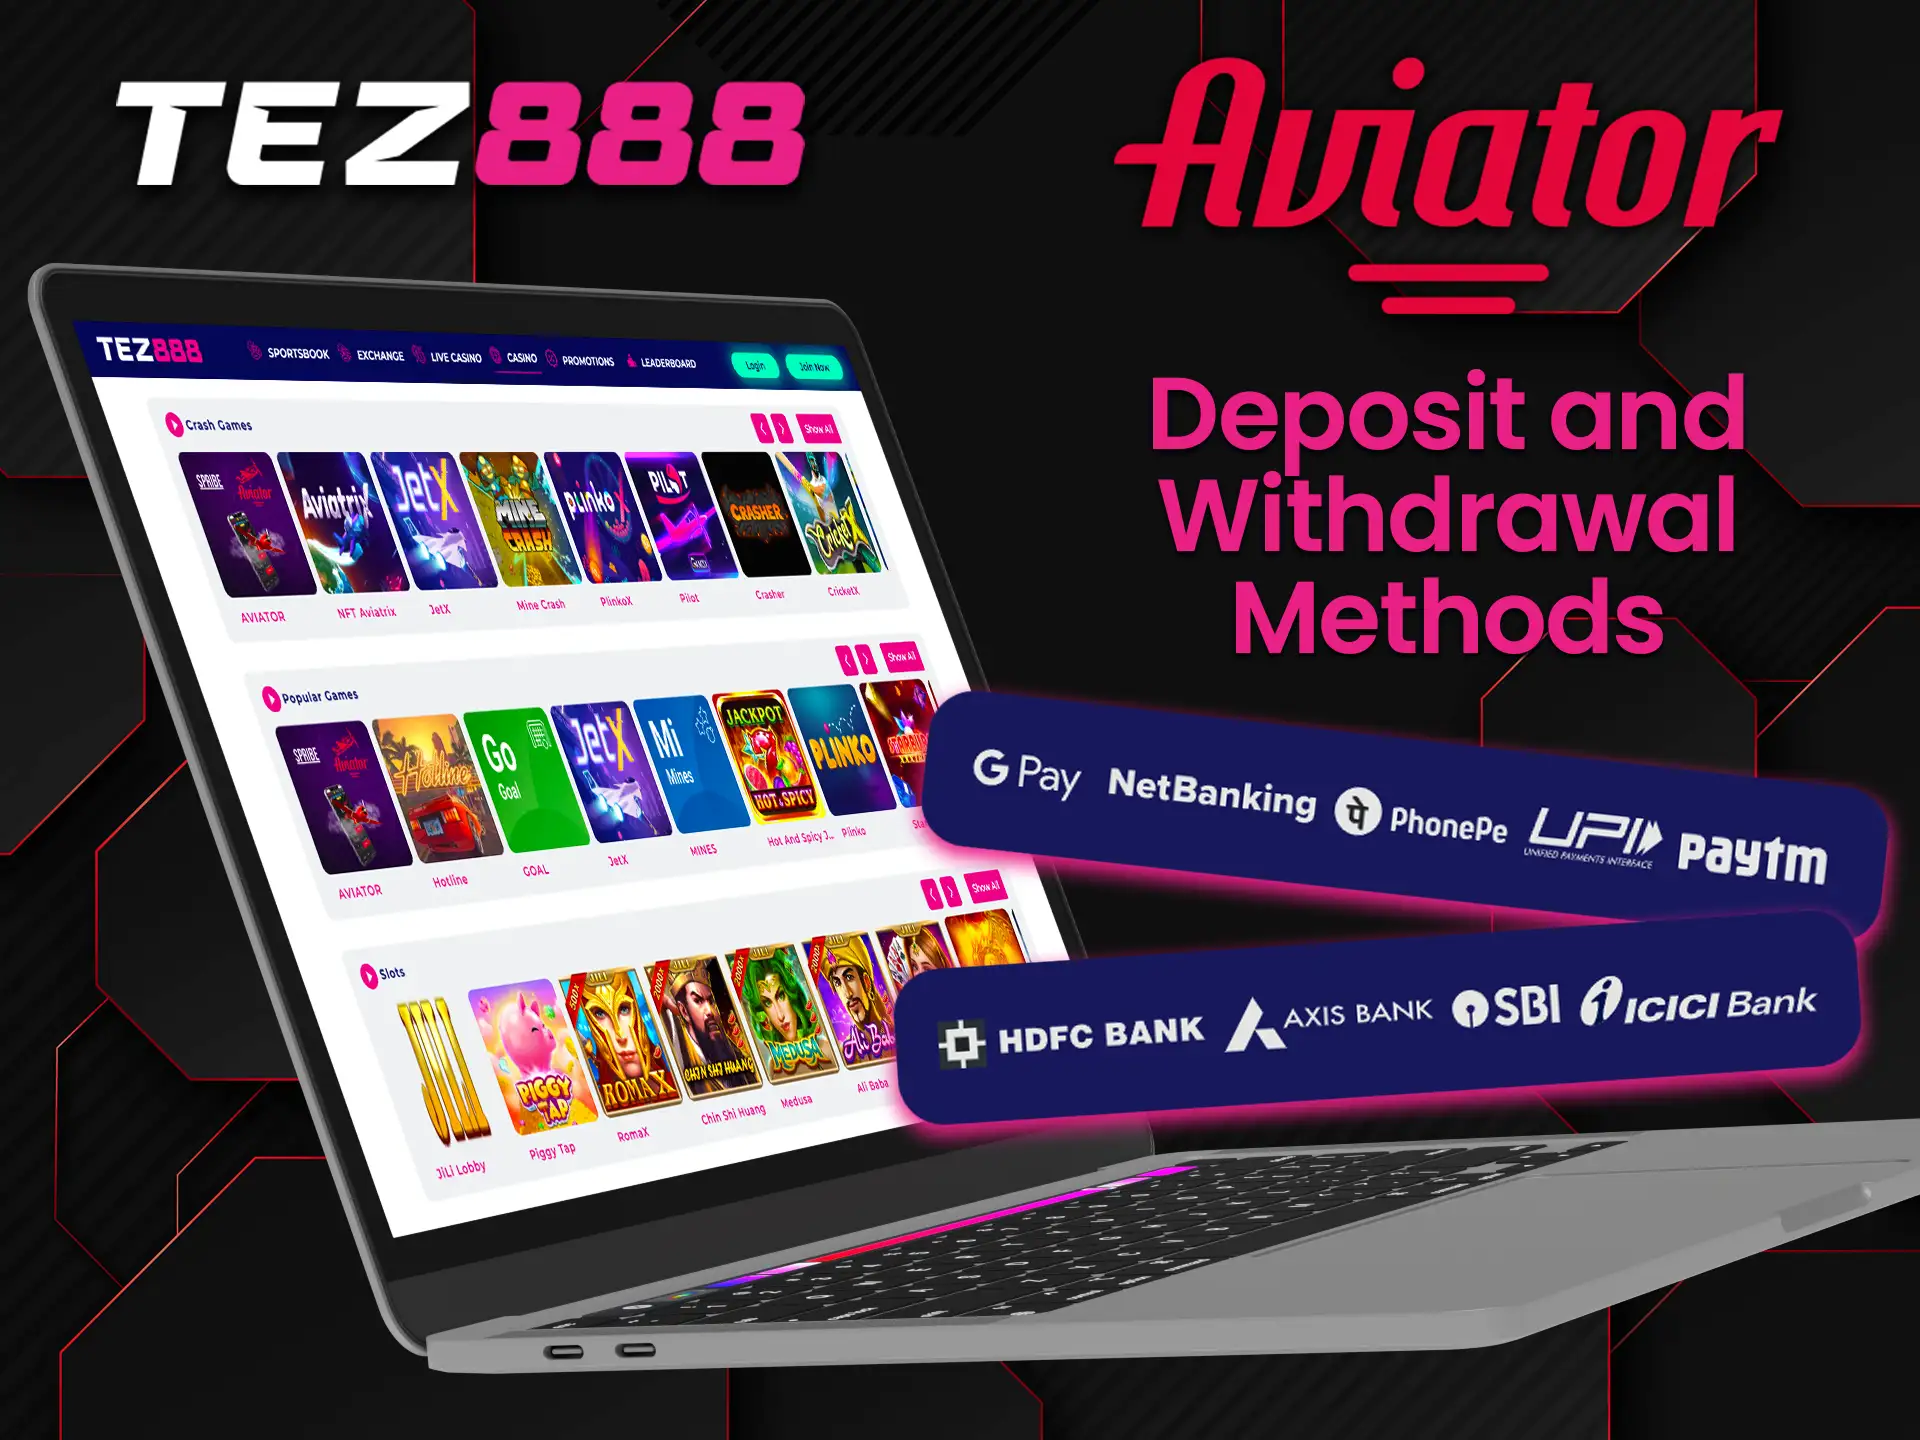 Make a deposit to get full access to the Aviator game at Tez888.